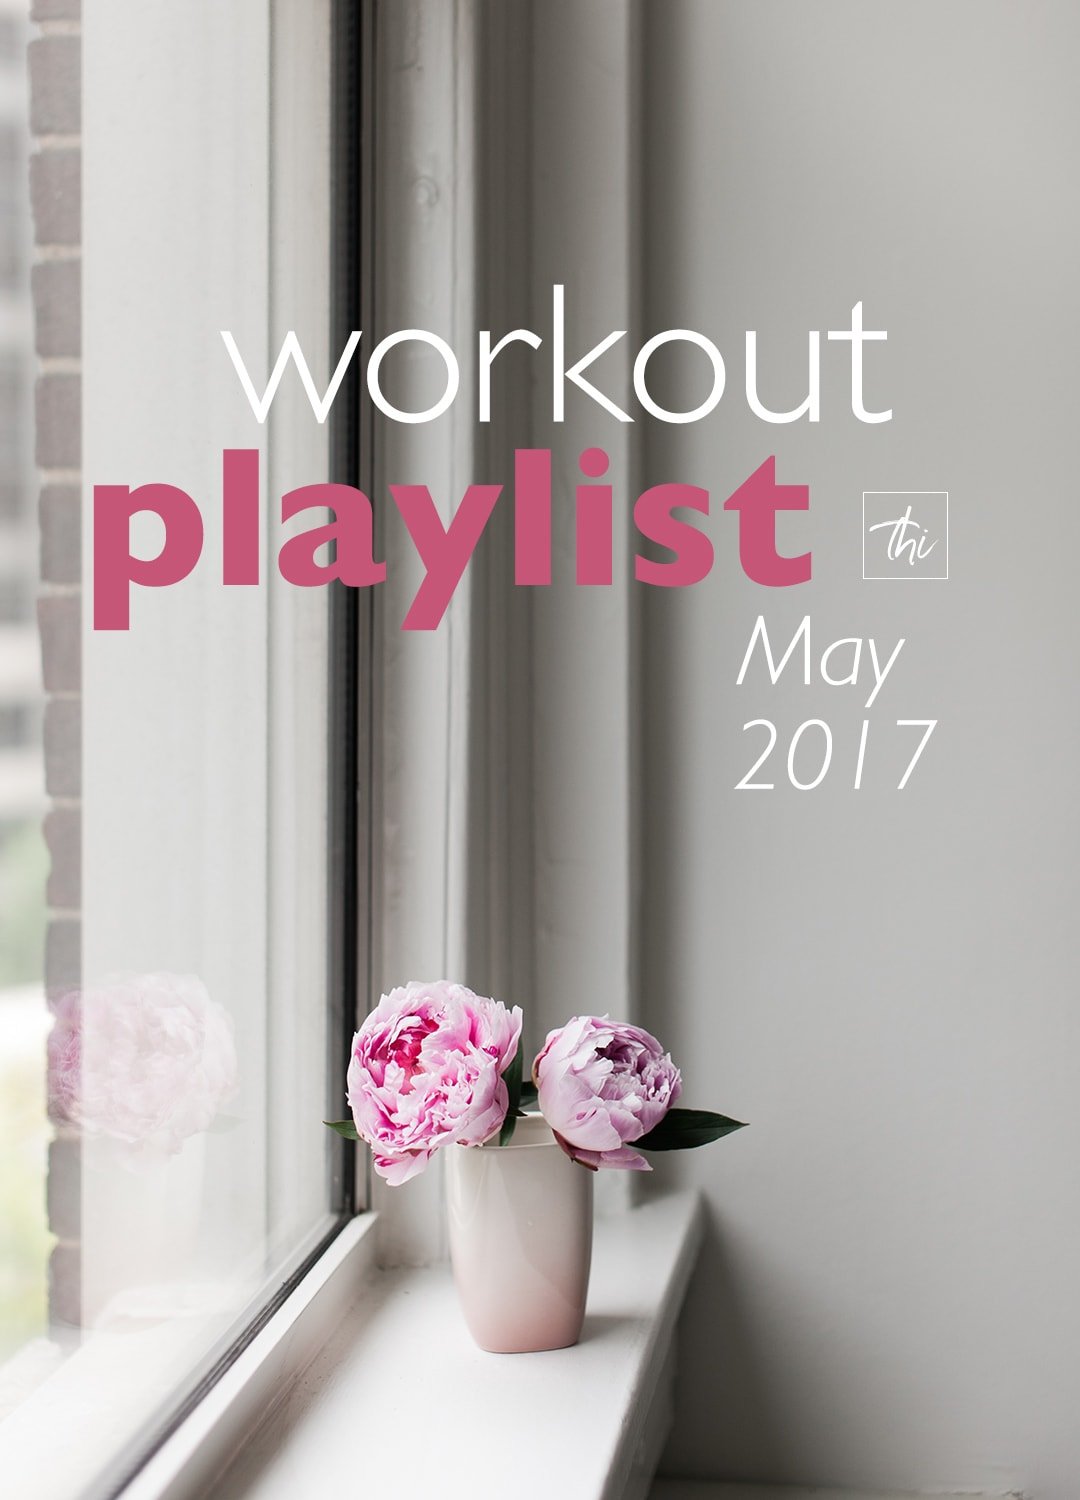 Workout Playlist May 2017 - over 1 hour of new great songs that will motivate you to work out! Great for running! | thehealthfulideas.com